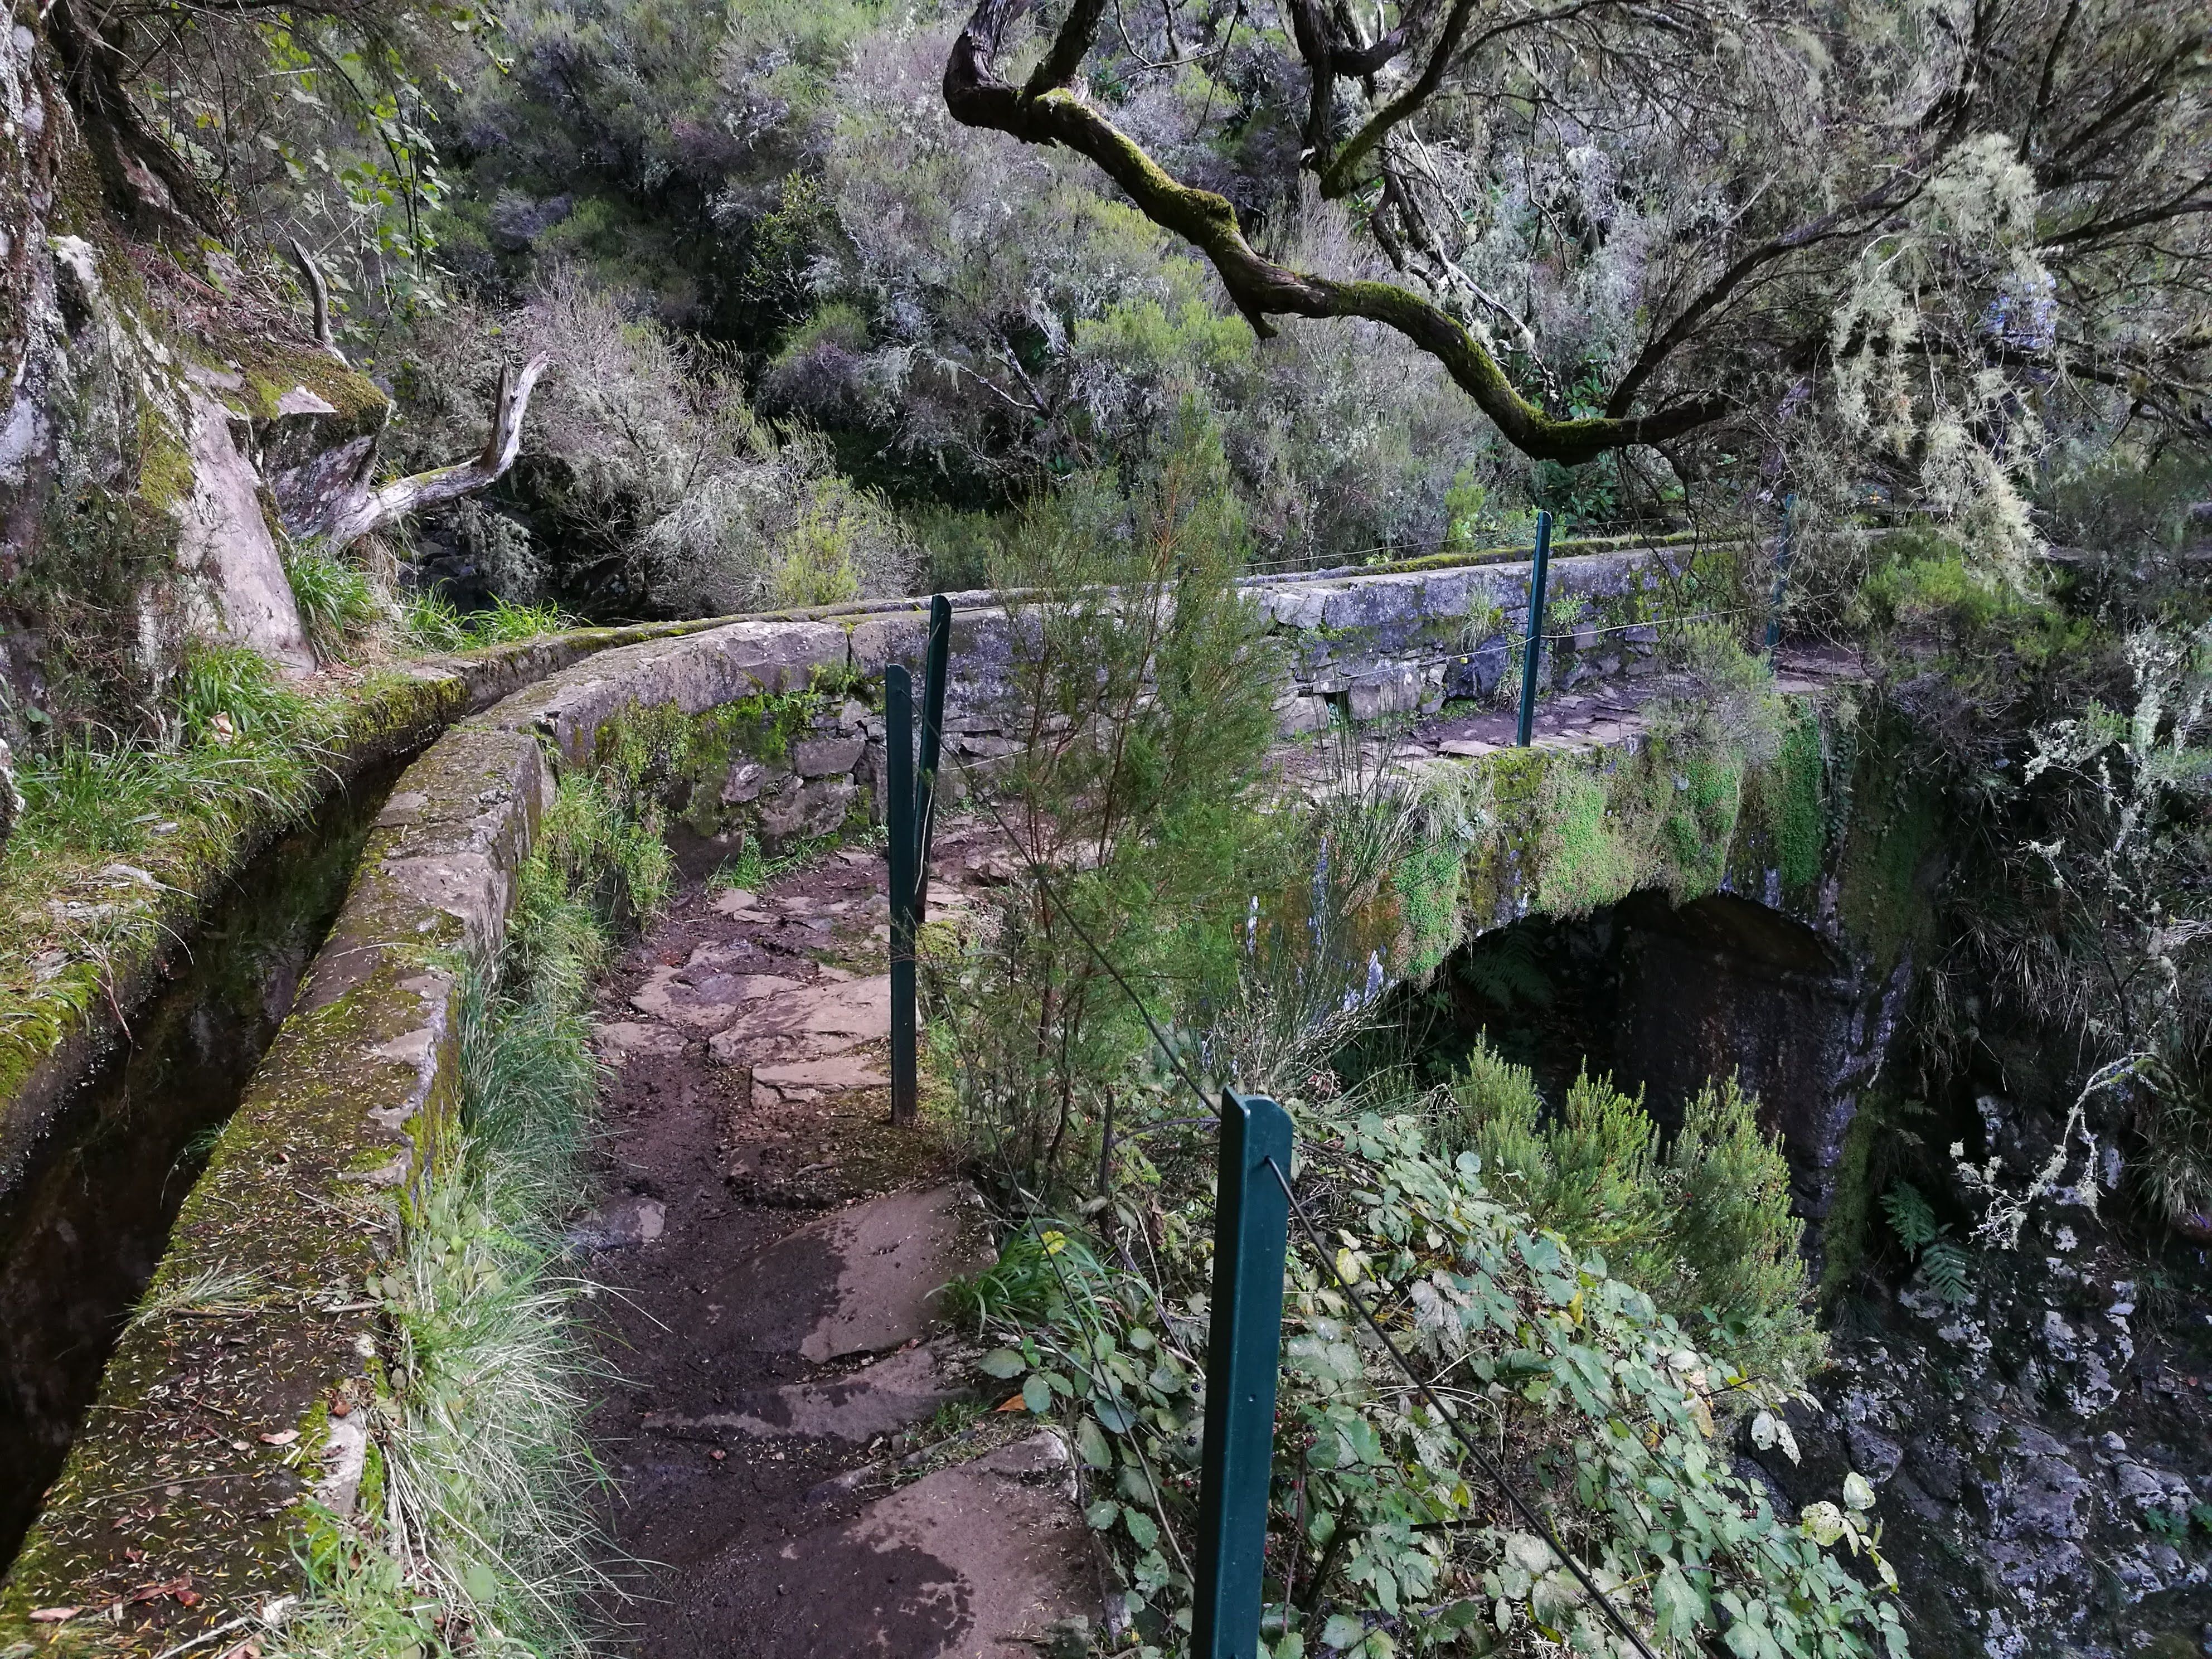 A levada (water channel) in the lush forest